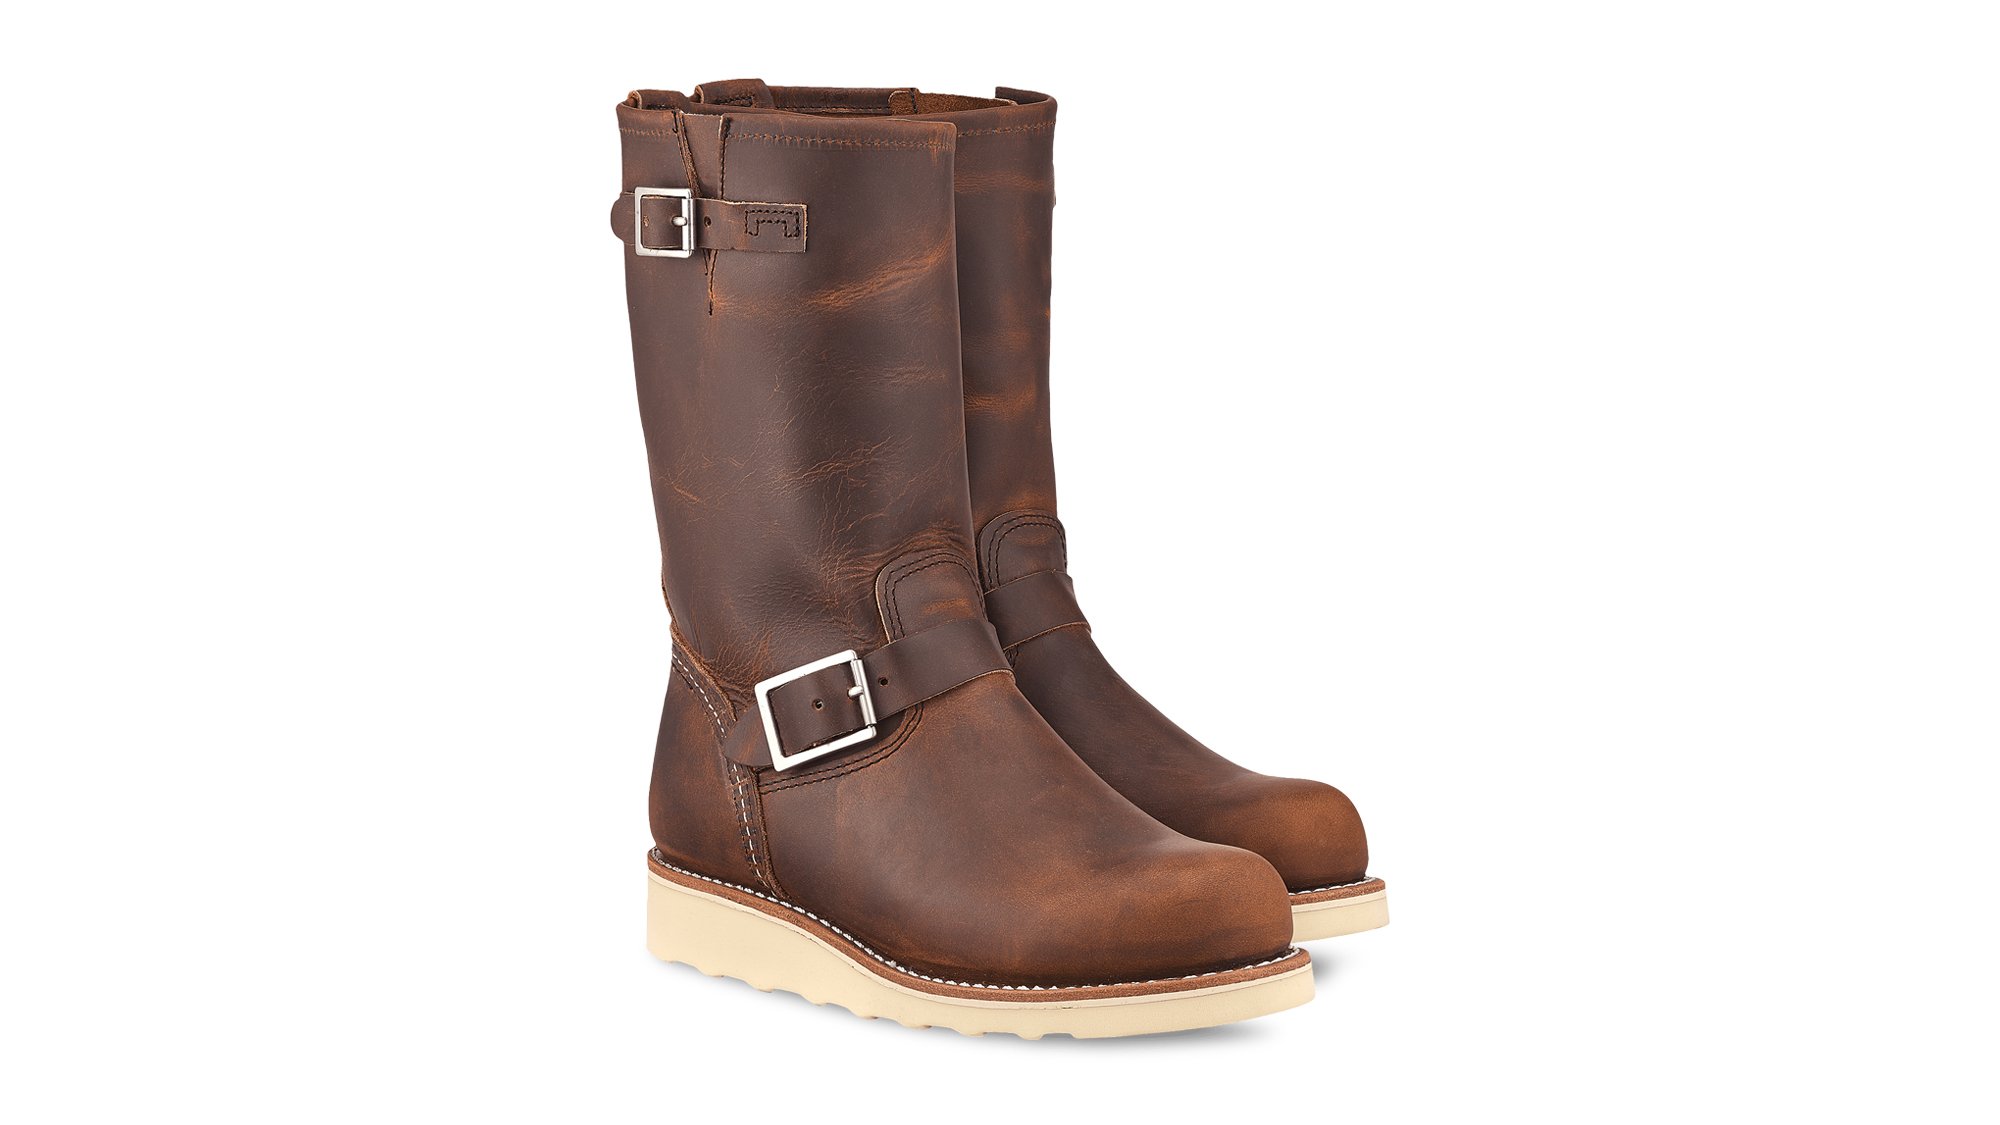 Shop the Engineer 3470 | Official Red Wing Shoes Online Store